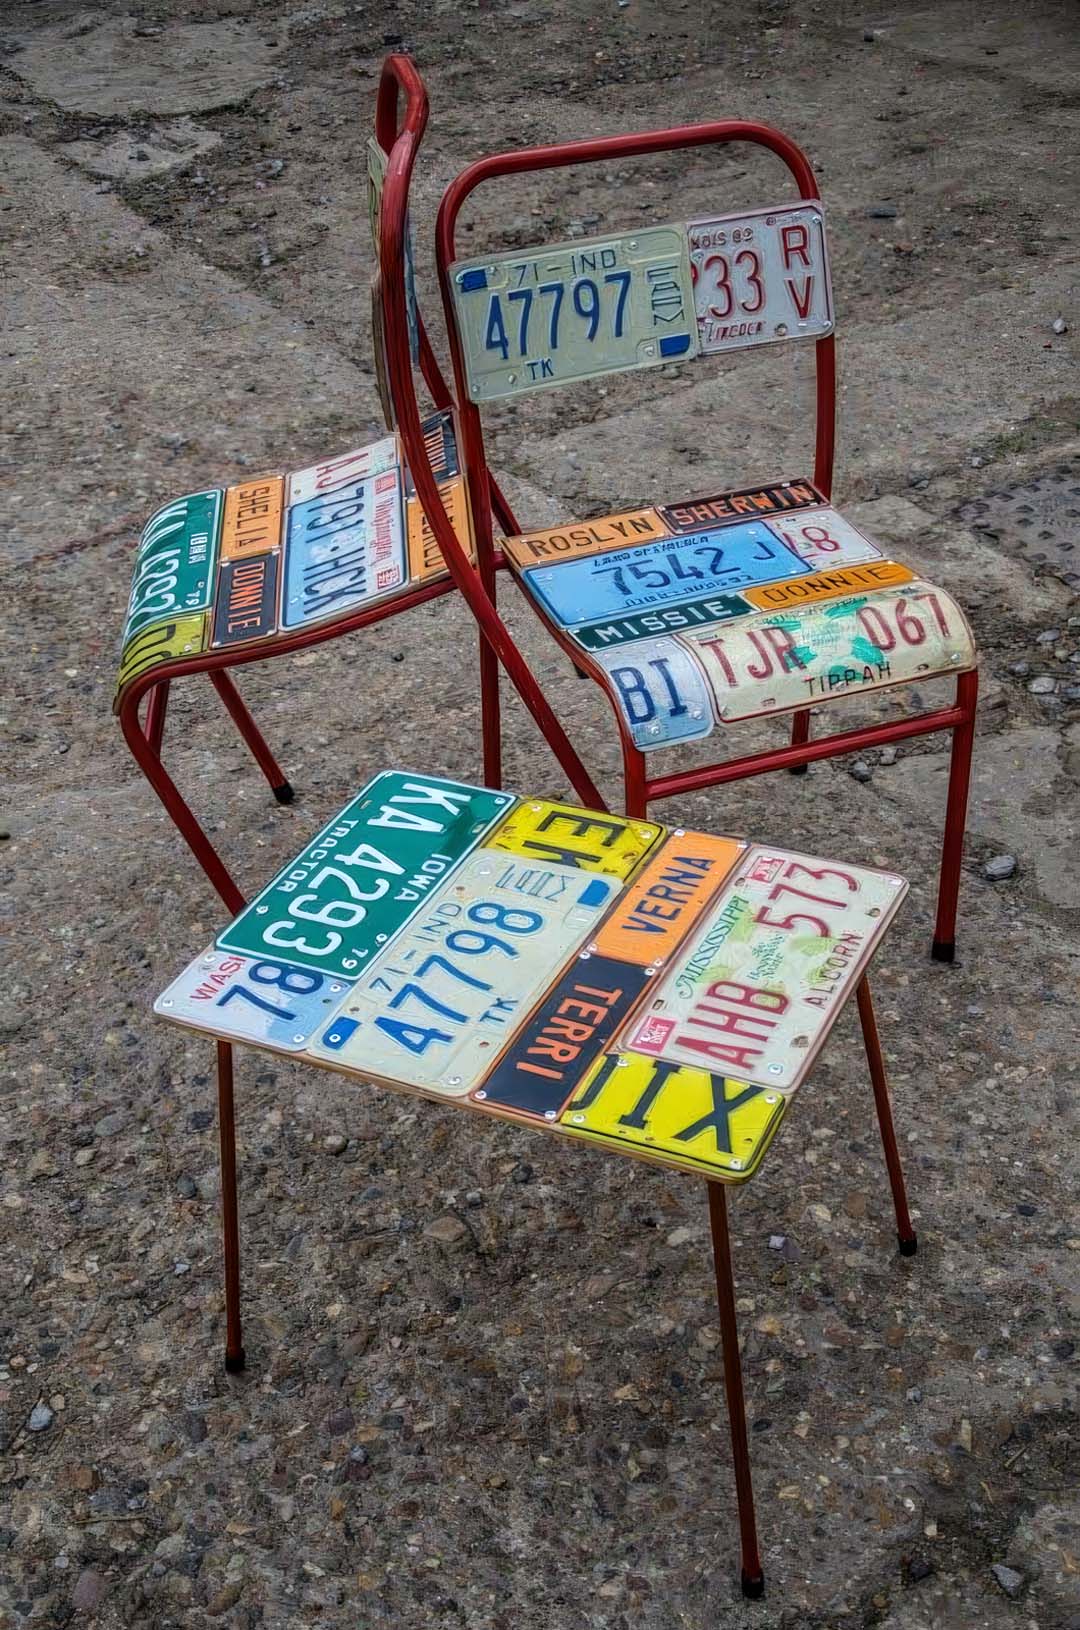 Patio chair and table made from license plates